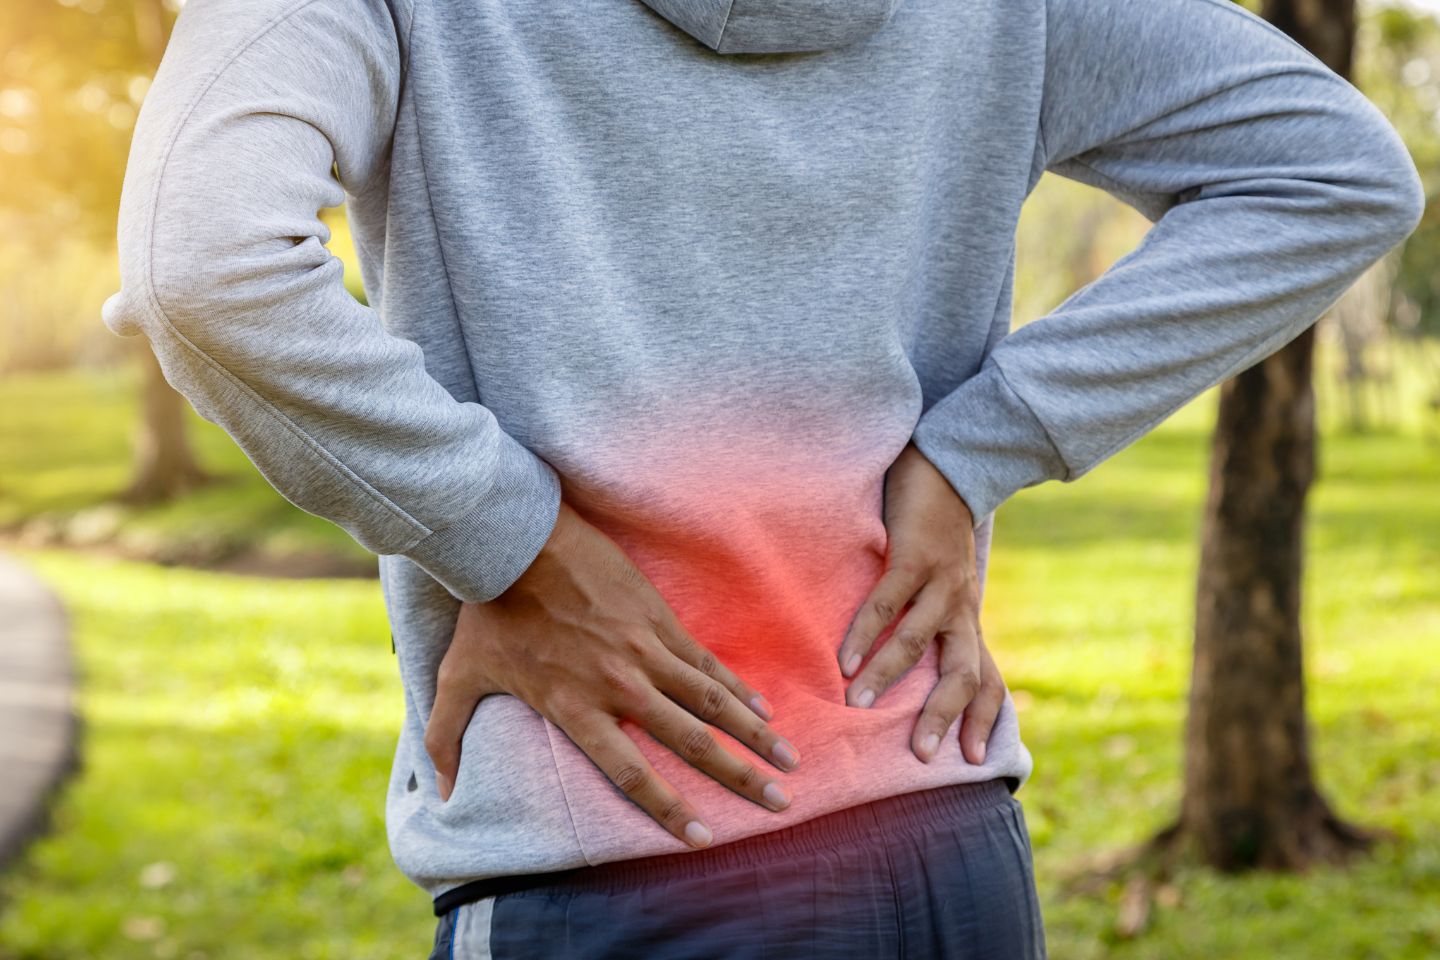 A Standout Choice for Tackling Lower Back Pain